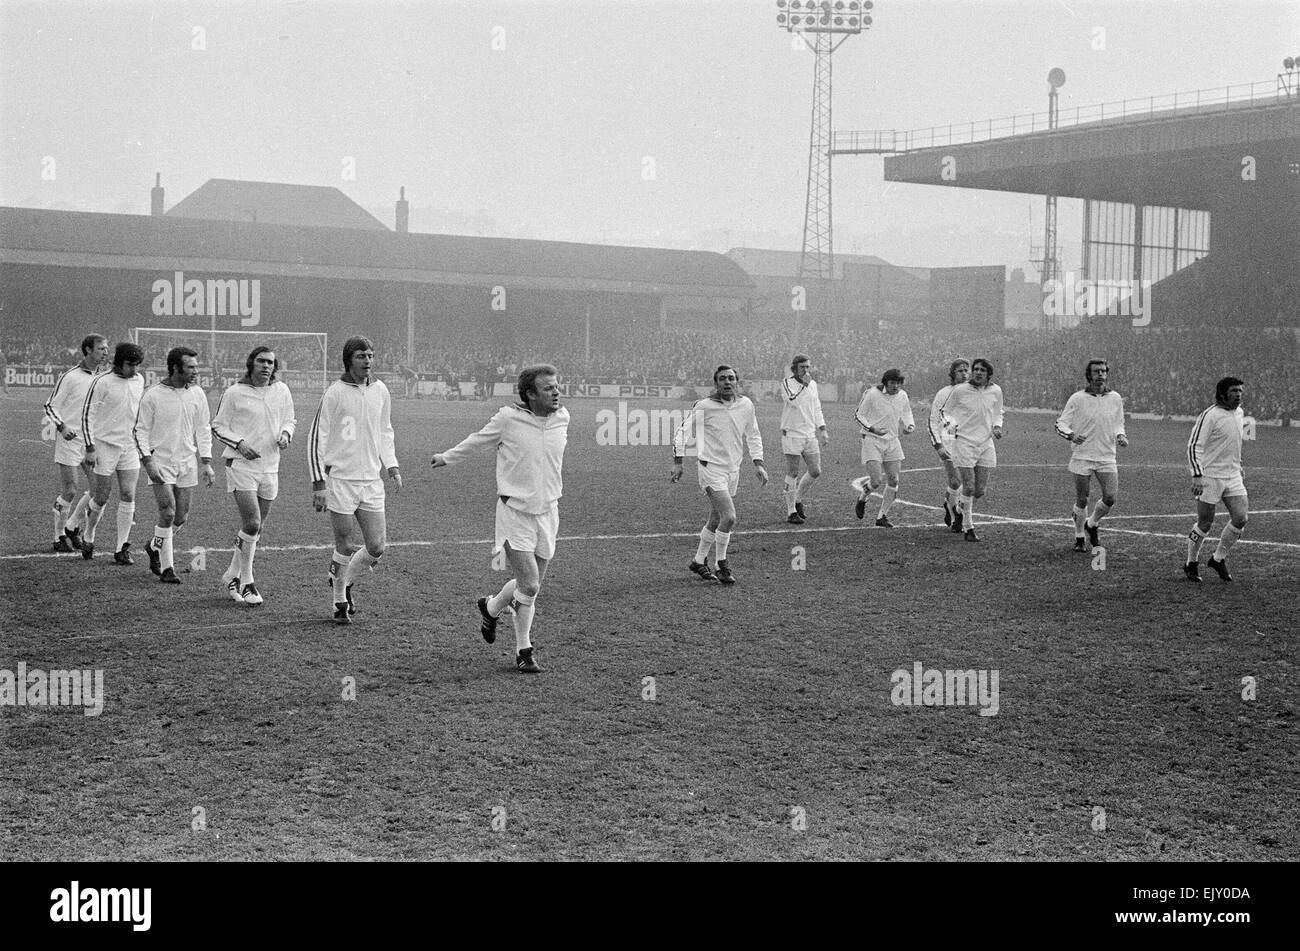 FA Cup Quarter Final match at Elland Road. Leeds United 2 v Tottenham Hotspur 1. The Leeds team led by their manager Les Cocker and captain Billy Bremner warm up on the pitch before kick off. 18th March 1972. Stock Photo